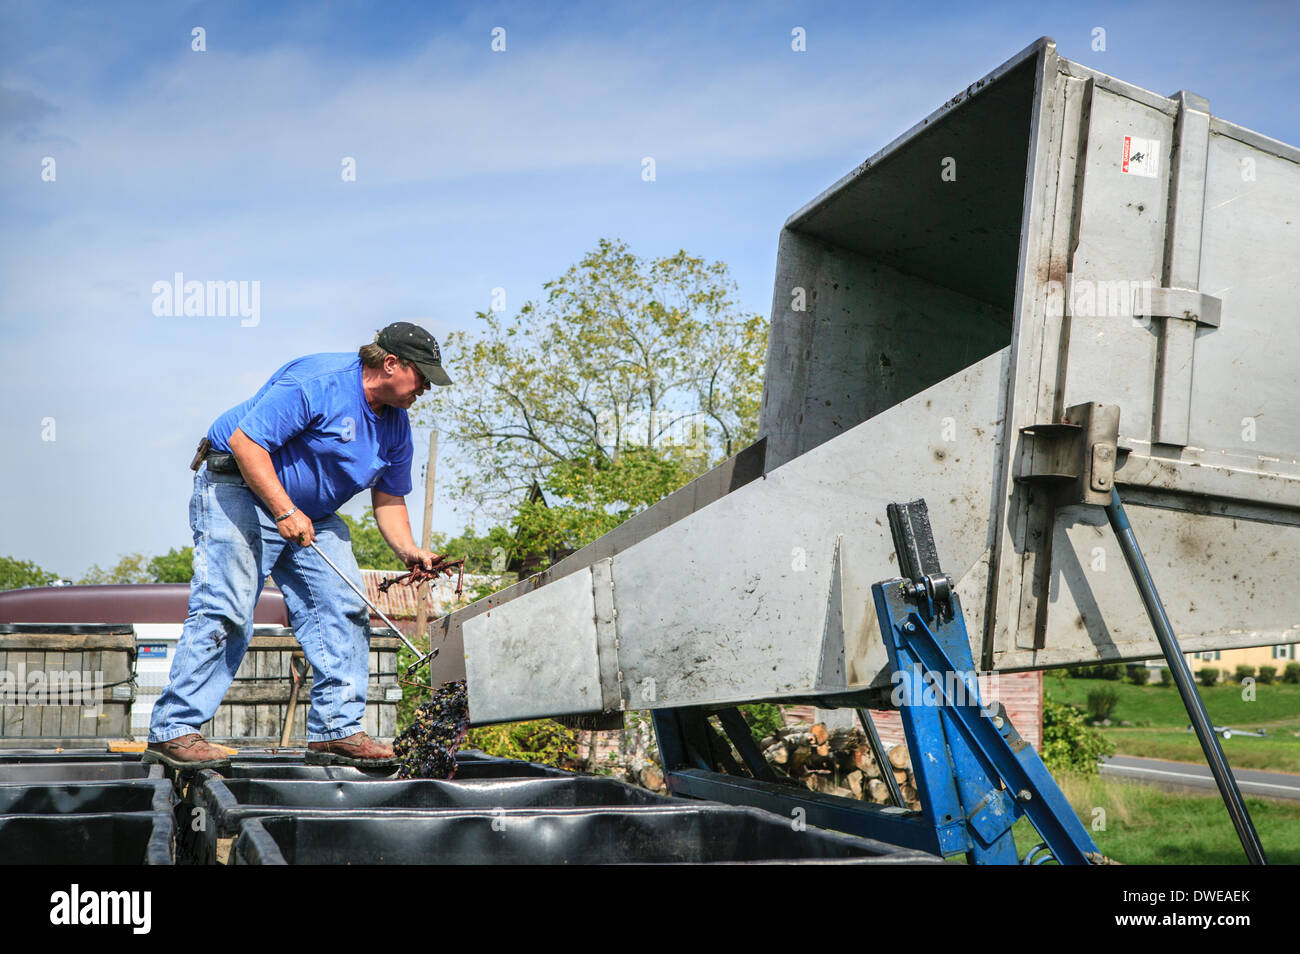 Dumping wine grapes from gondola into one ton bins, Finger Lakes, New York State, USA. Stock Photo